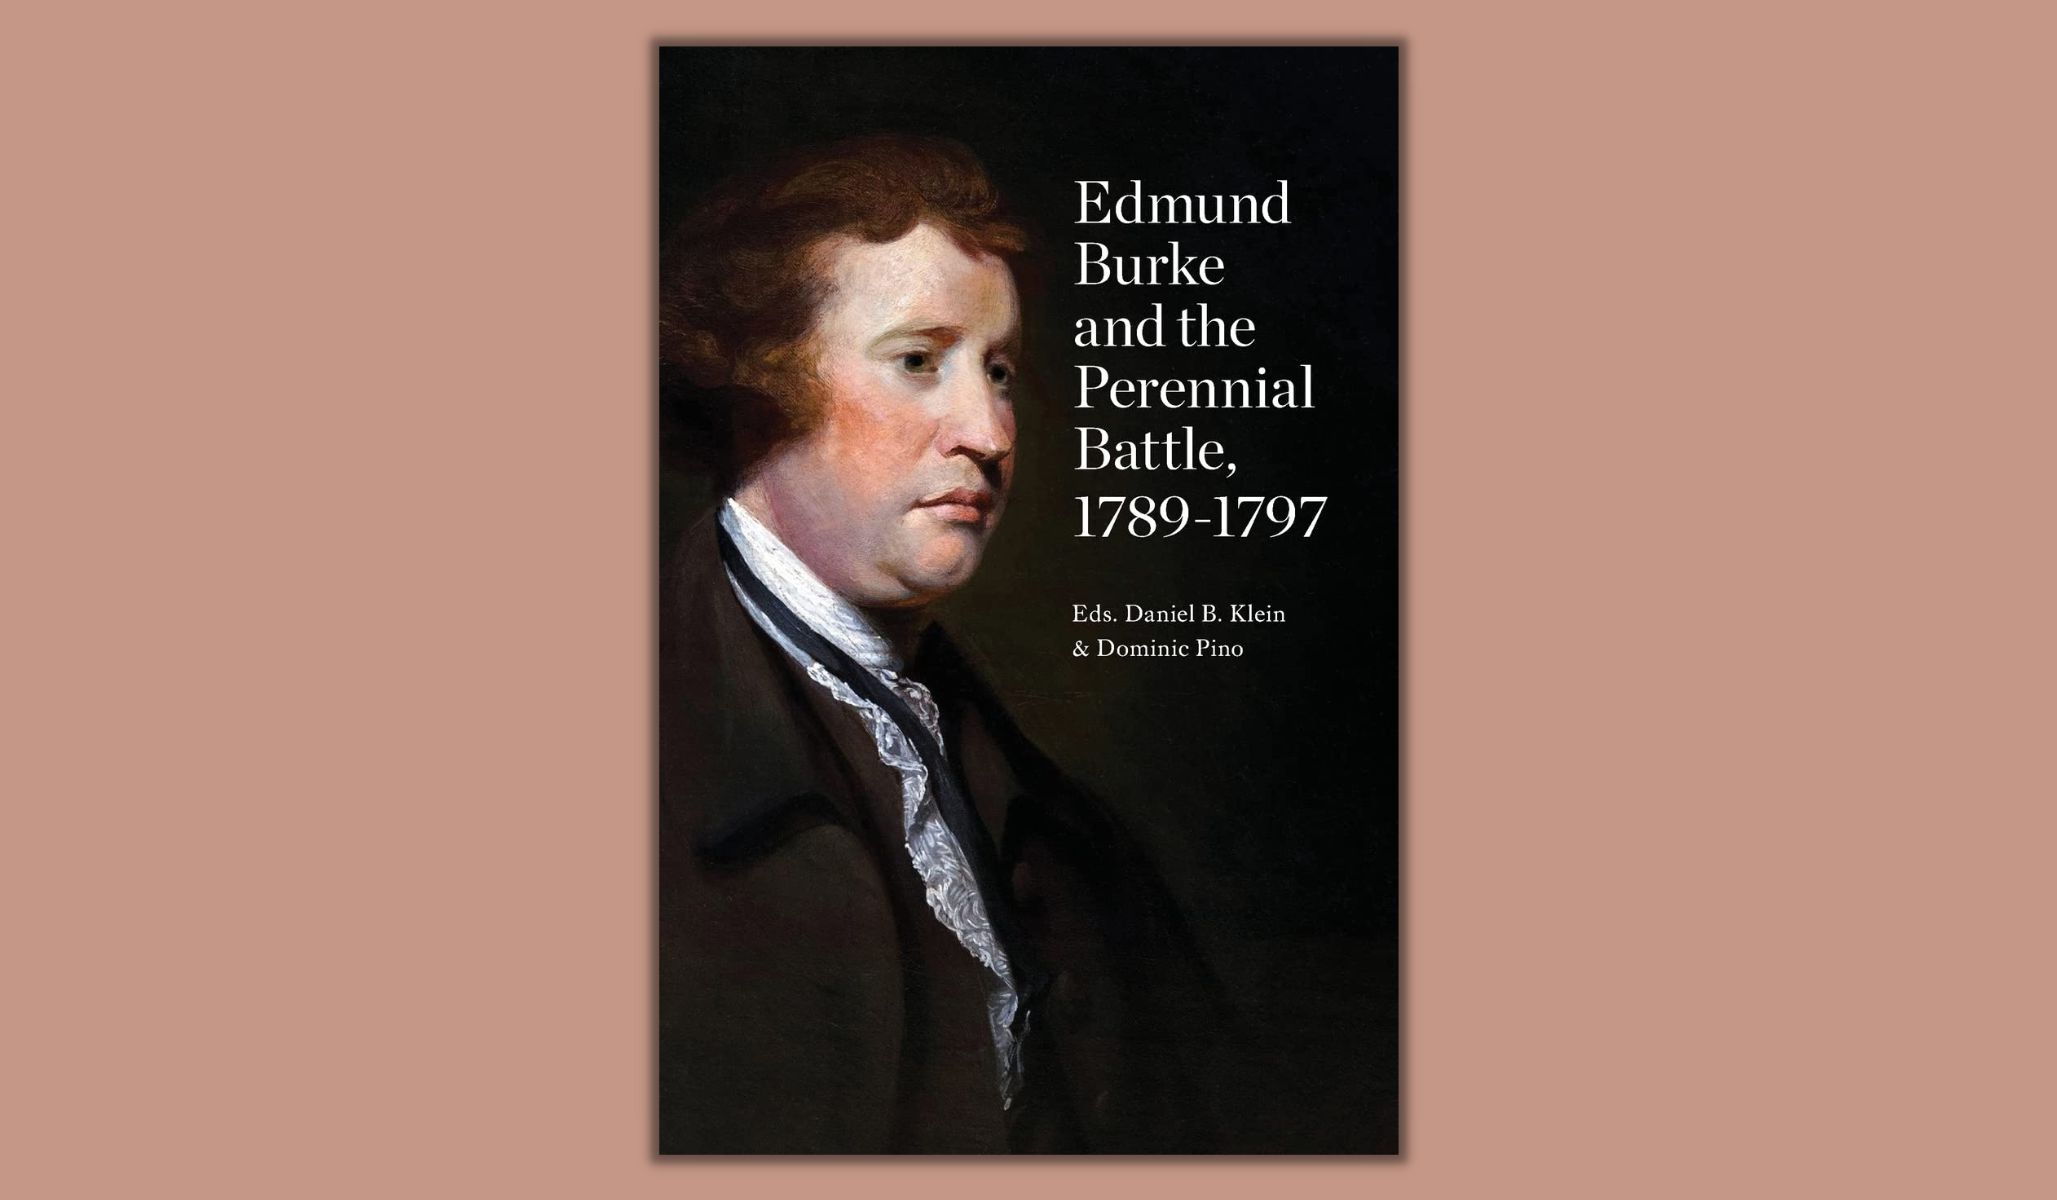 Episode 420: Edmund Burke and the Perennial Battle, 1789-1797 ed. by Dominic Pino and Daniel B. Klein